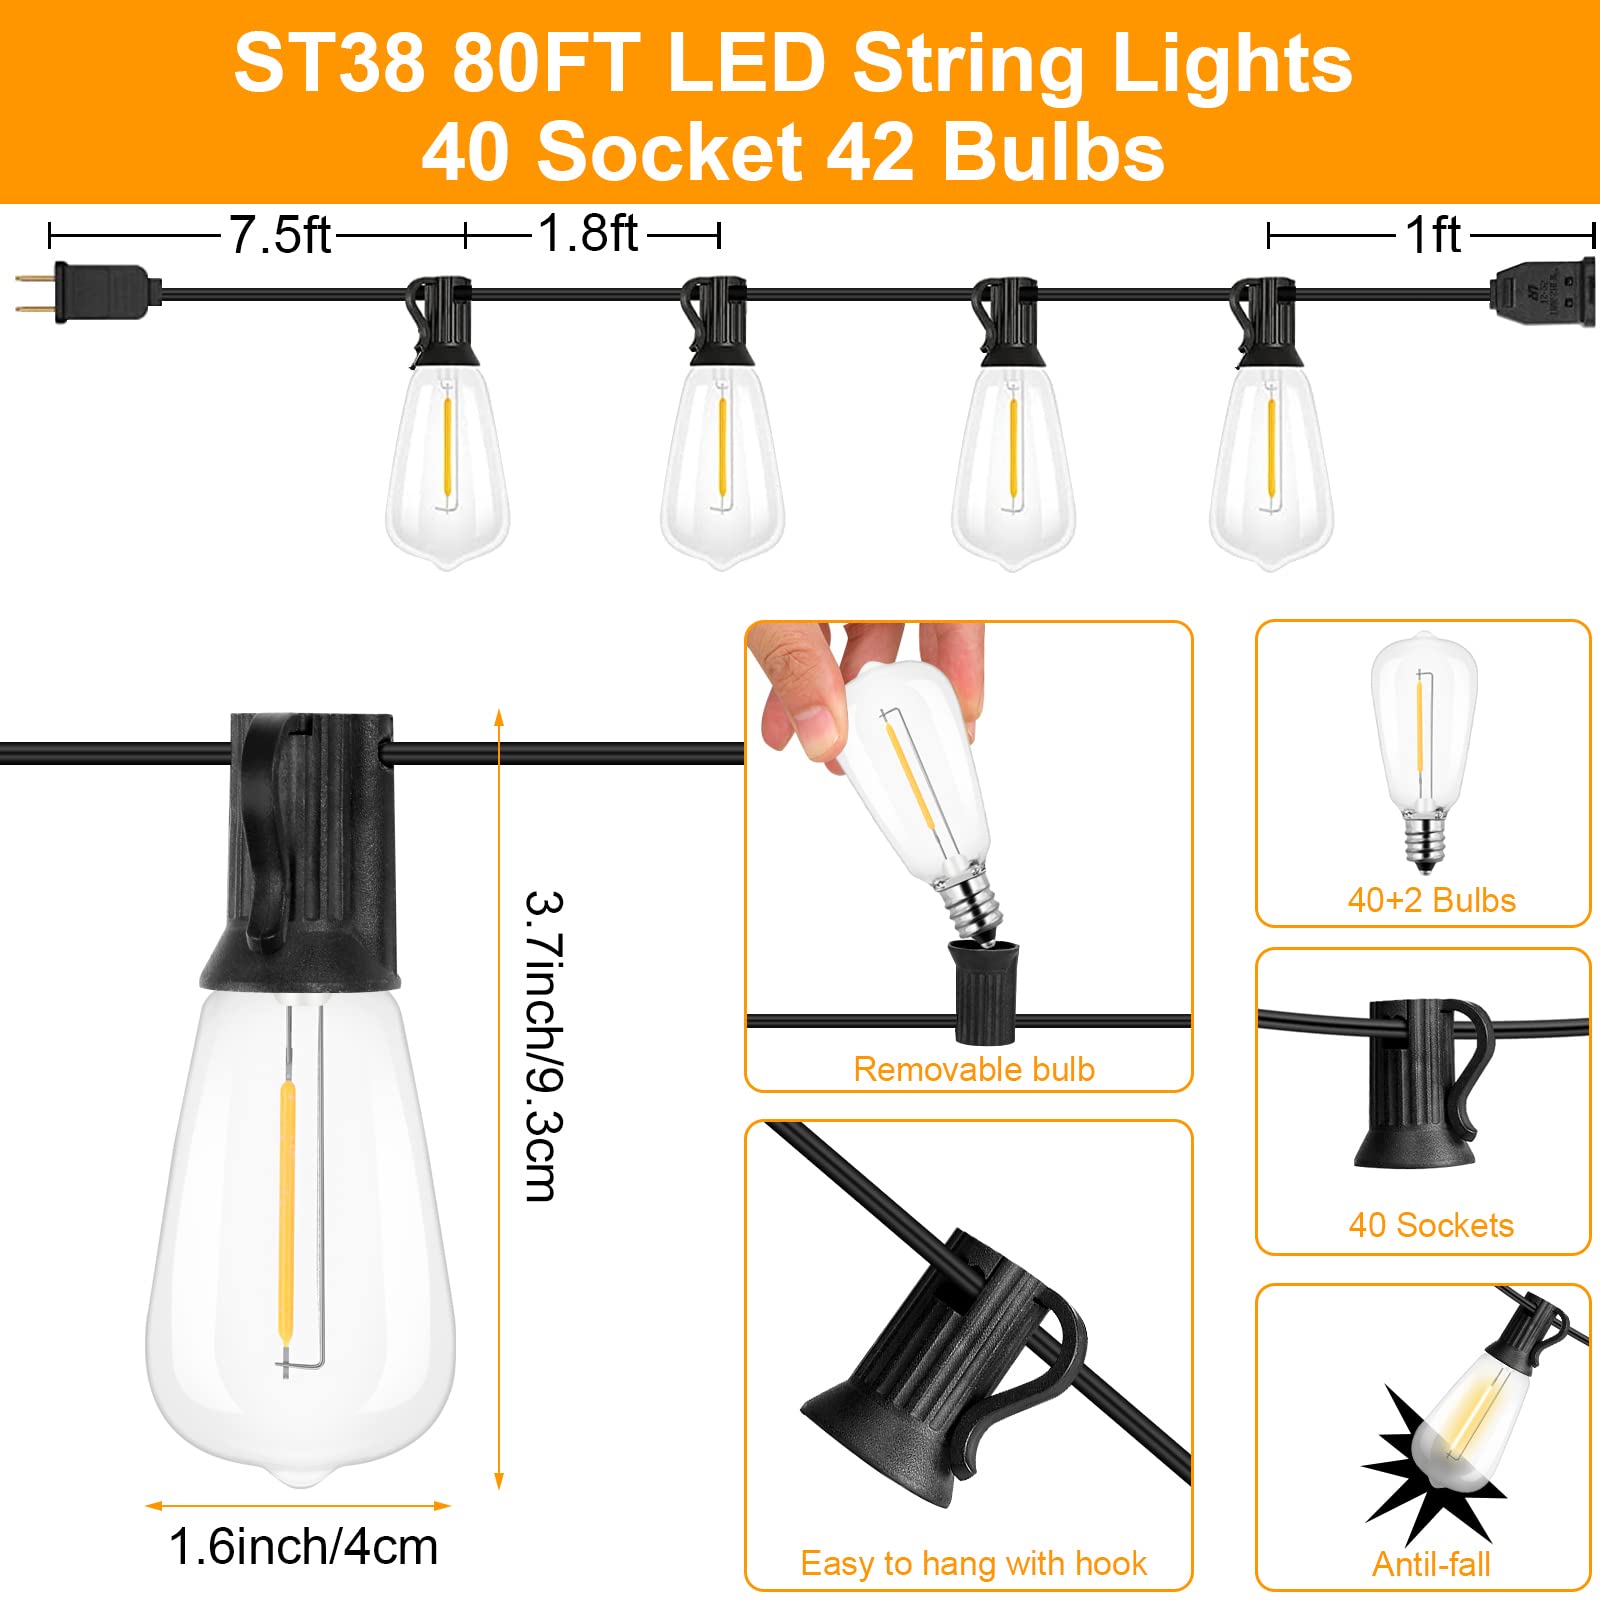 Outdoor String Lights 80ft ST38 Outdoor Lights with Waterproof Shatterproof 42 LED Bulbs(2 Spare)Connectable Patio Lights for Indoor Outdoor Courtyard Cafe Porch Party Led Outdoor String Lights